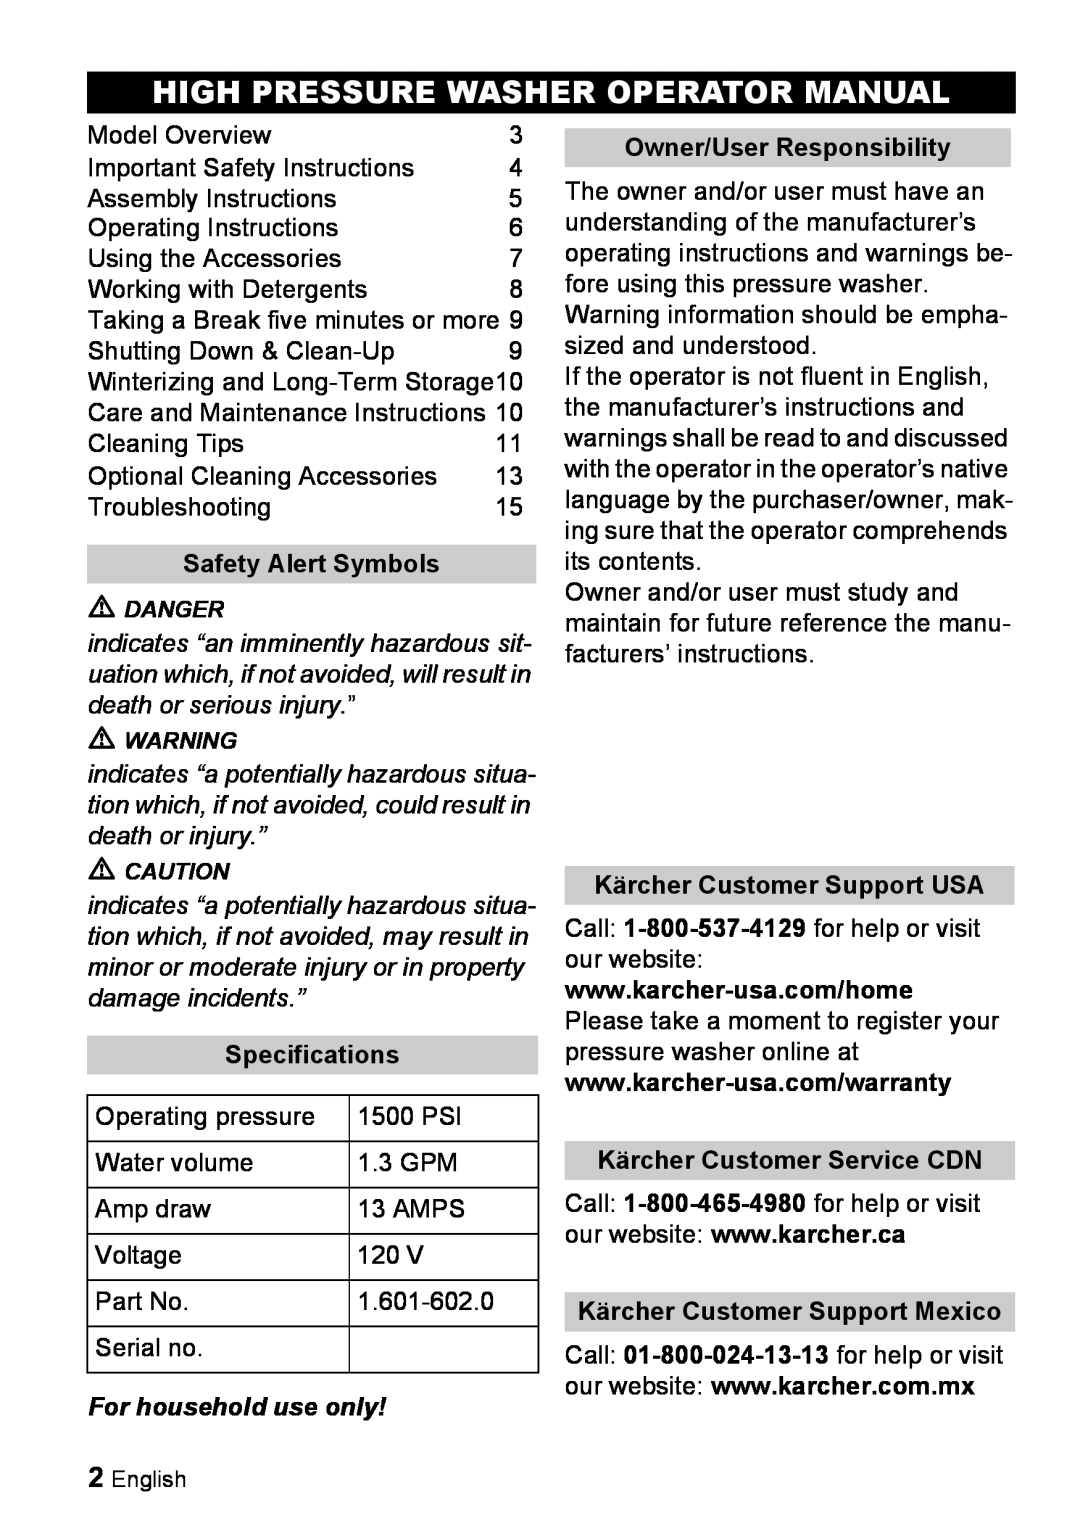 Karcher K 2.26M manual High Pressure Washer Operator Manual, Safety Alert Symbols, Specifications, For household use only 